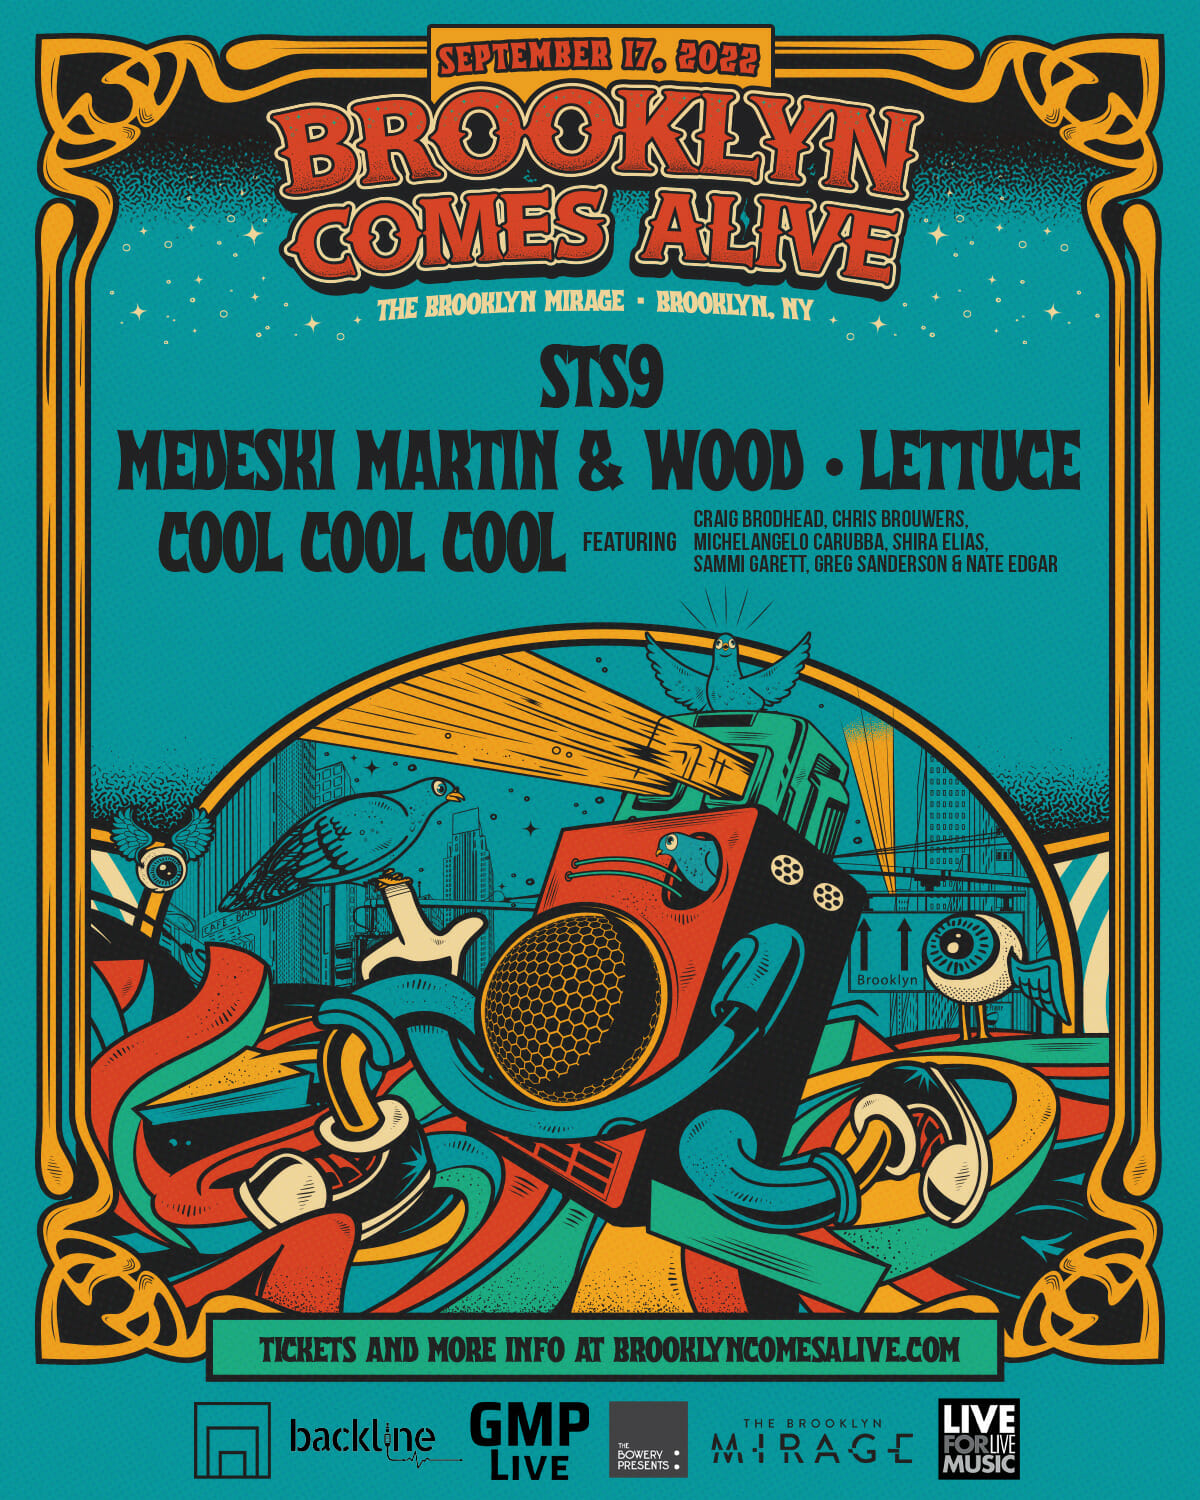 Brooklyn Comes Alive Announces 2022 Lineup: STS9, Lettuce, Medeski, Martin & Wood and More